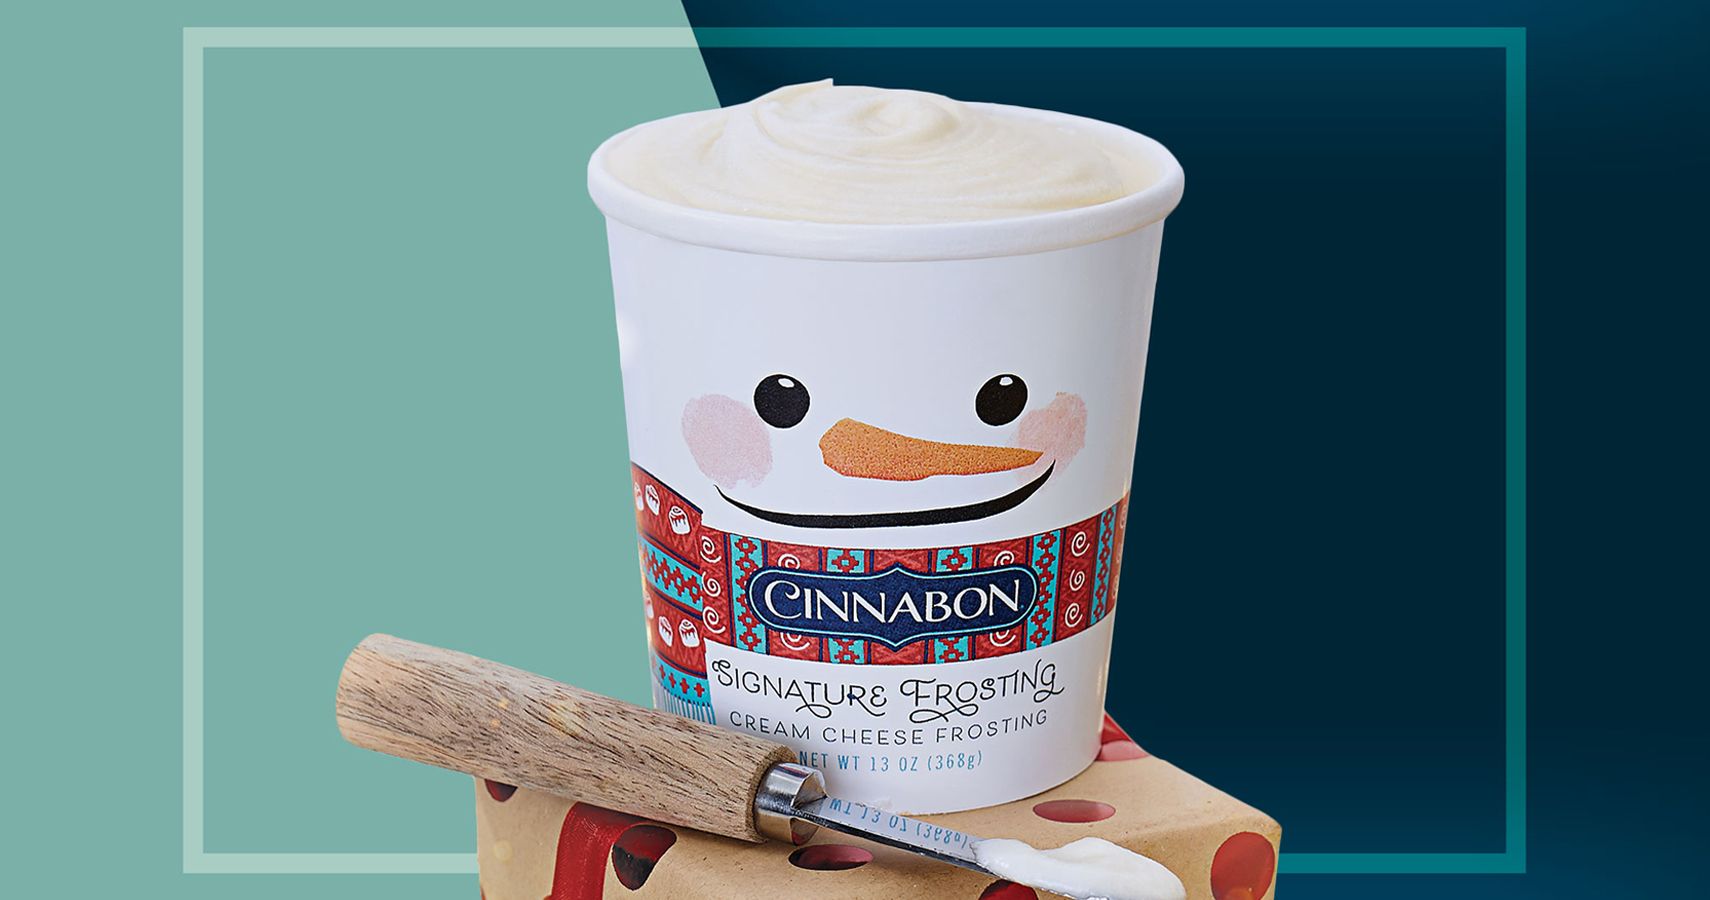 Holiday Baking Just Got Tastier Now That Cinnabon Is Selling Their Signature Cream Cheese Frosting